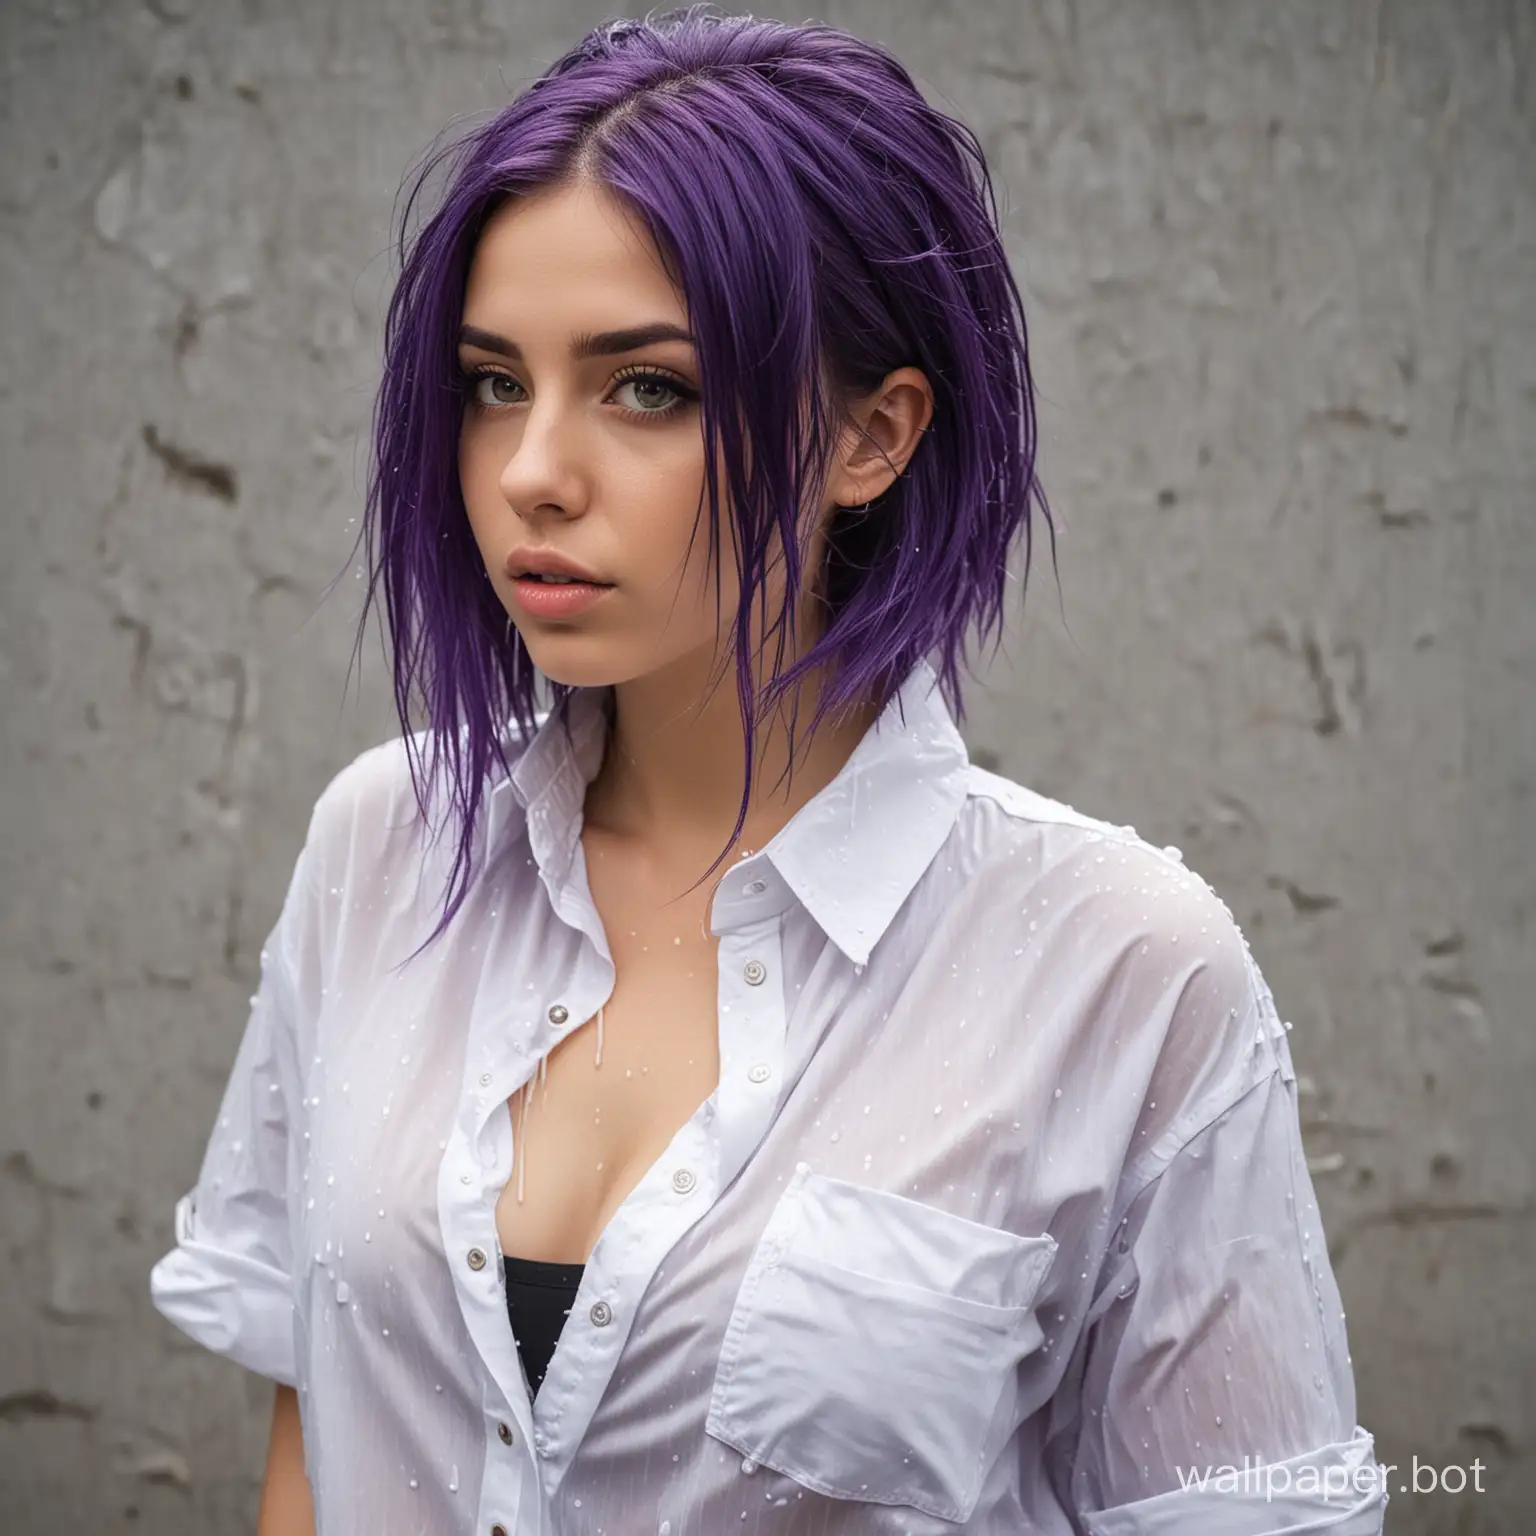 Girl-with-Purple-Hair-Wet-Shirt-and-Confident-Stance